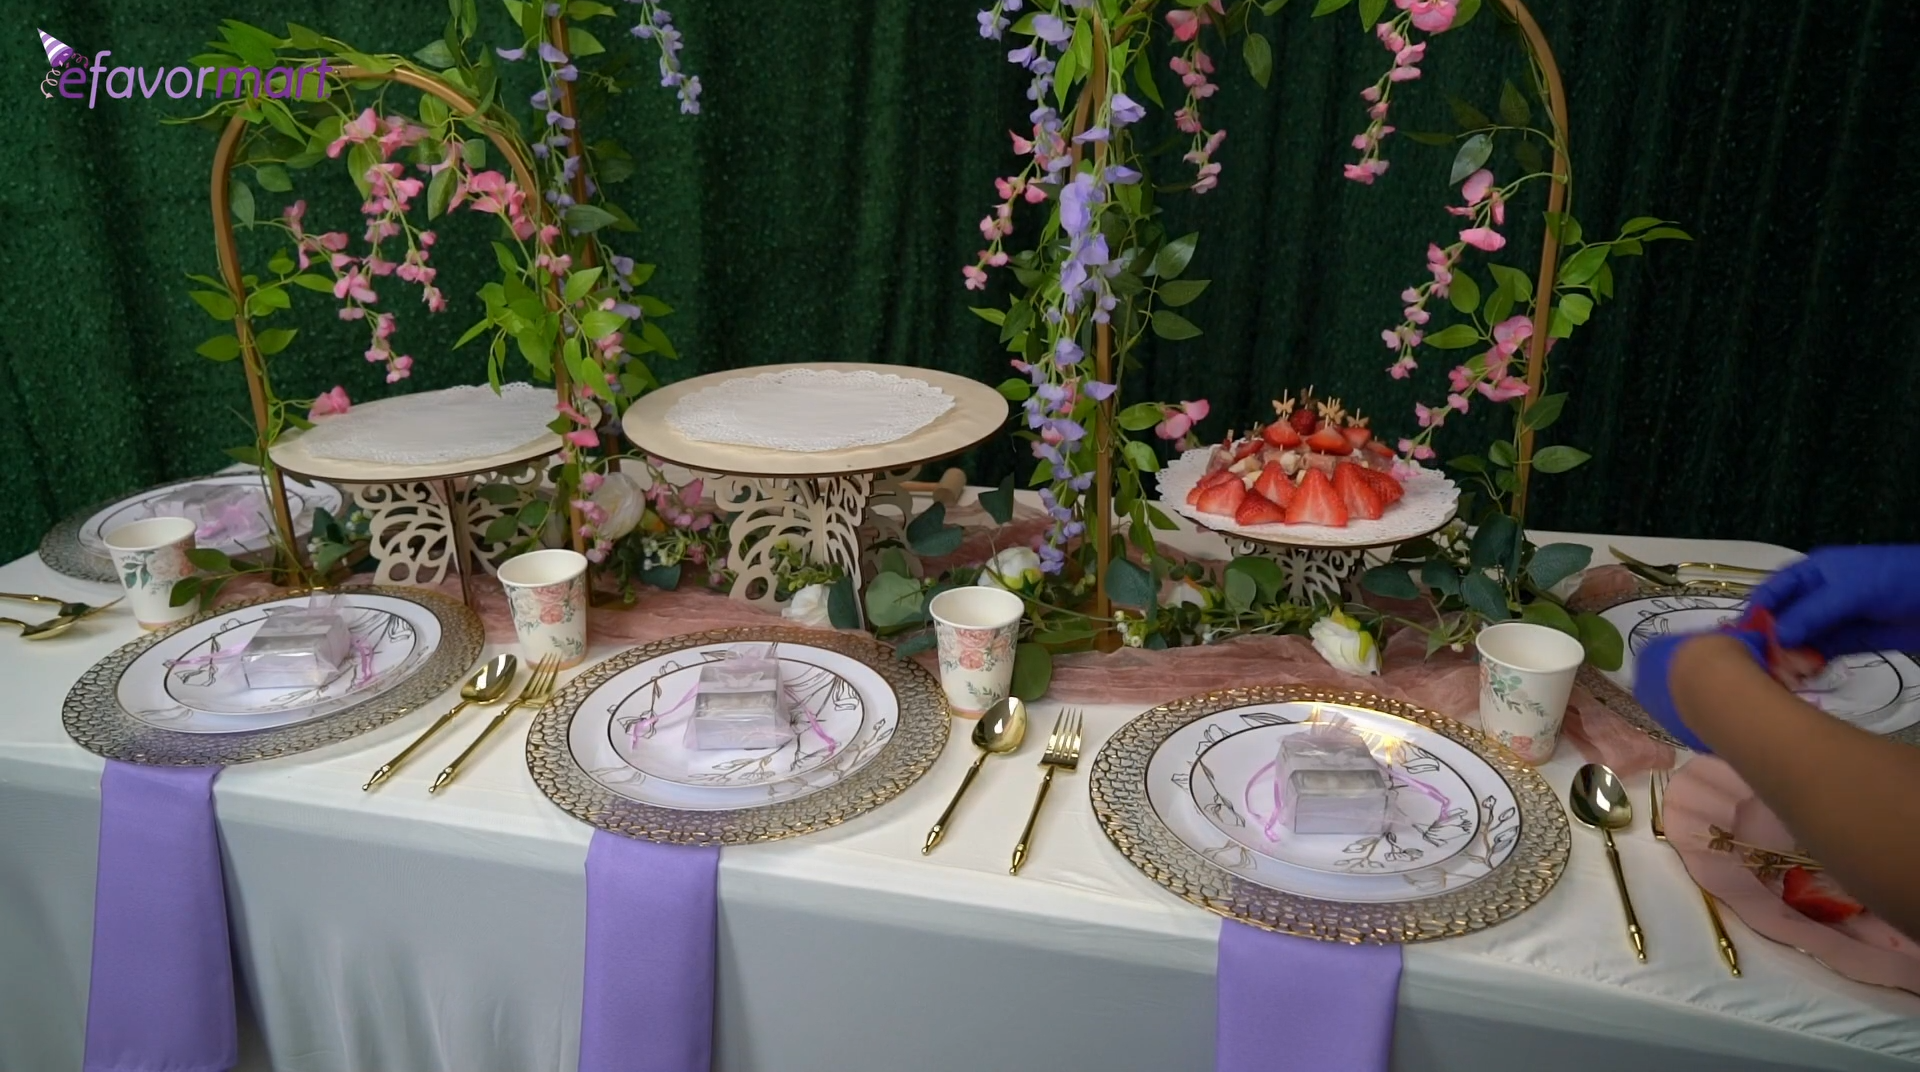 Tablescape using charger plates, dinner plates, cloth napkins, and utensils